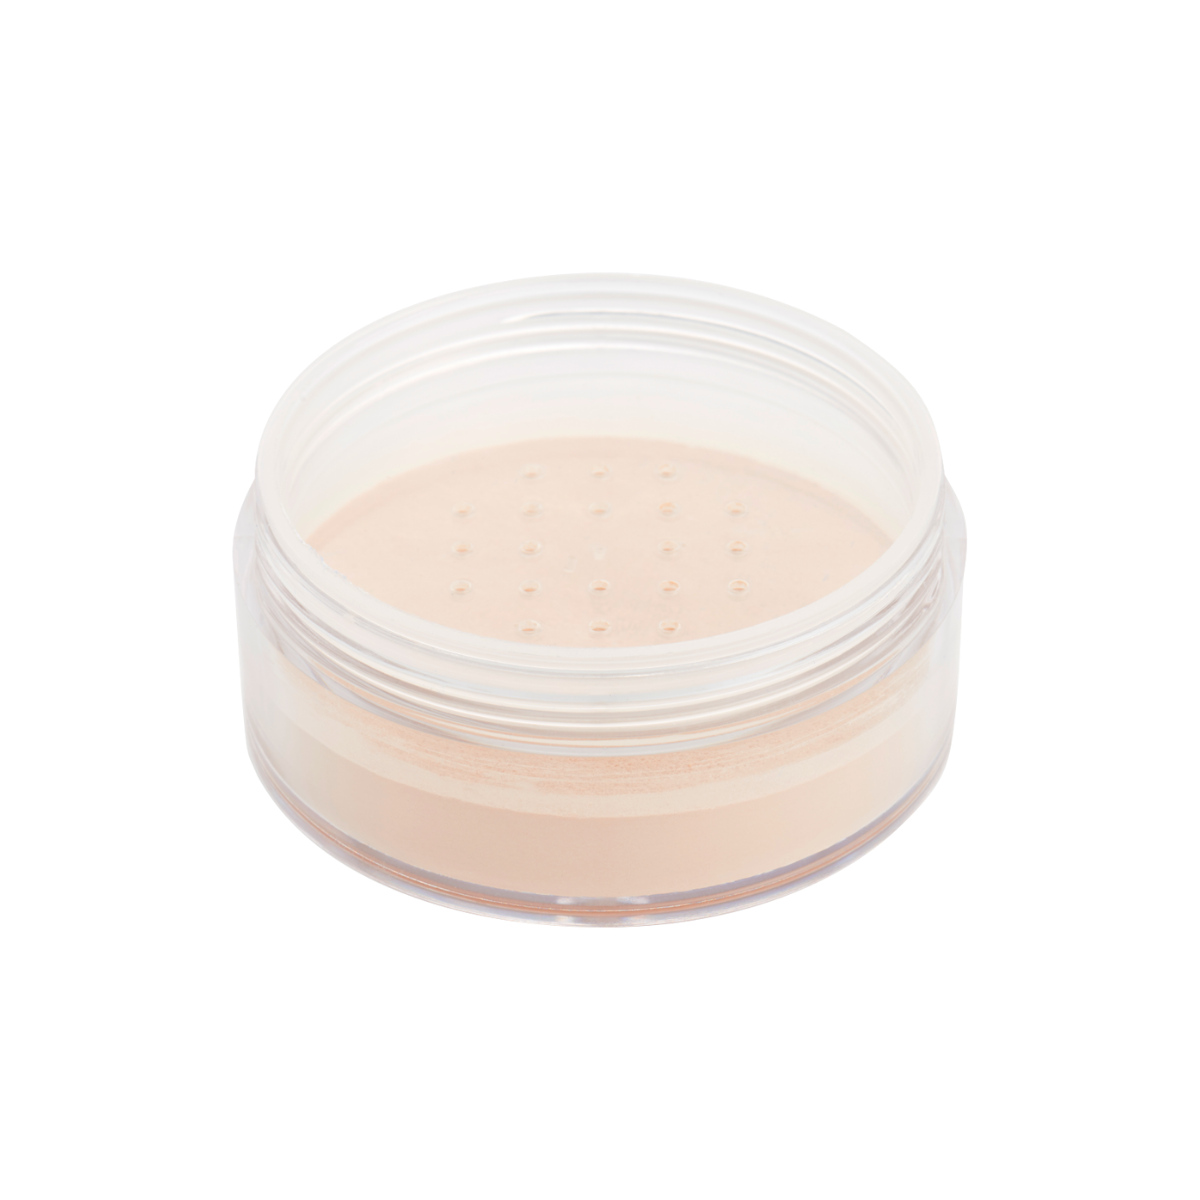 Lasting Perfection Sheer Loose Powder - Translucent – Collection